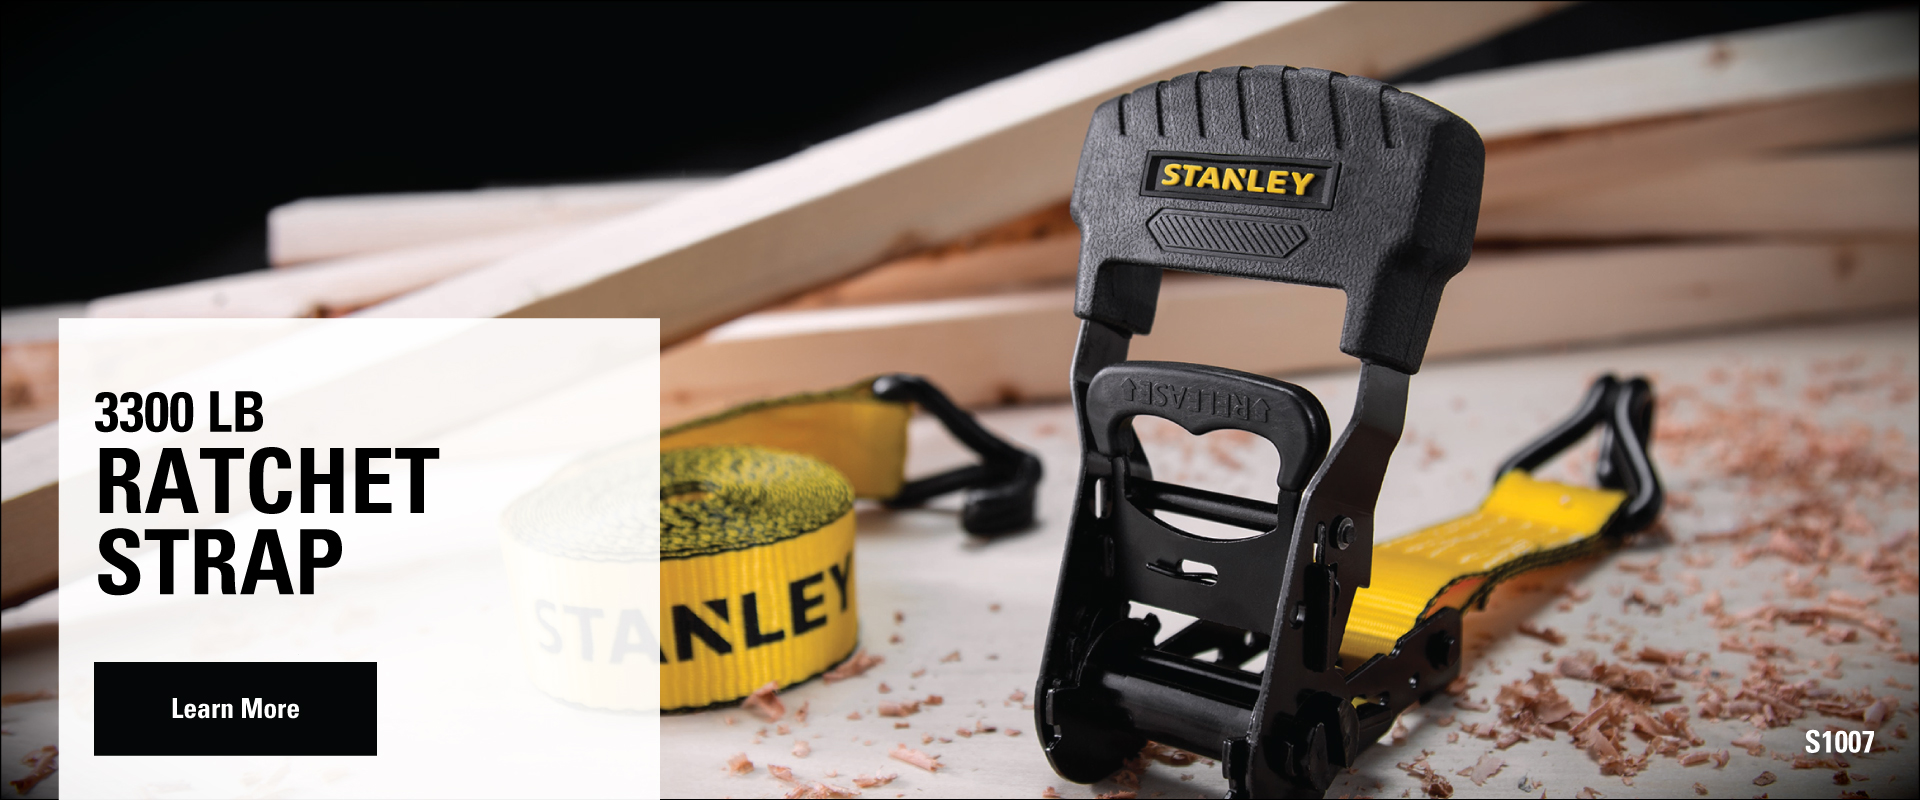 STANLEY® Straps: Automotive Specialty and Cargo Solutions